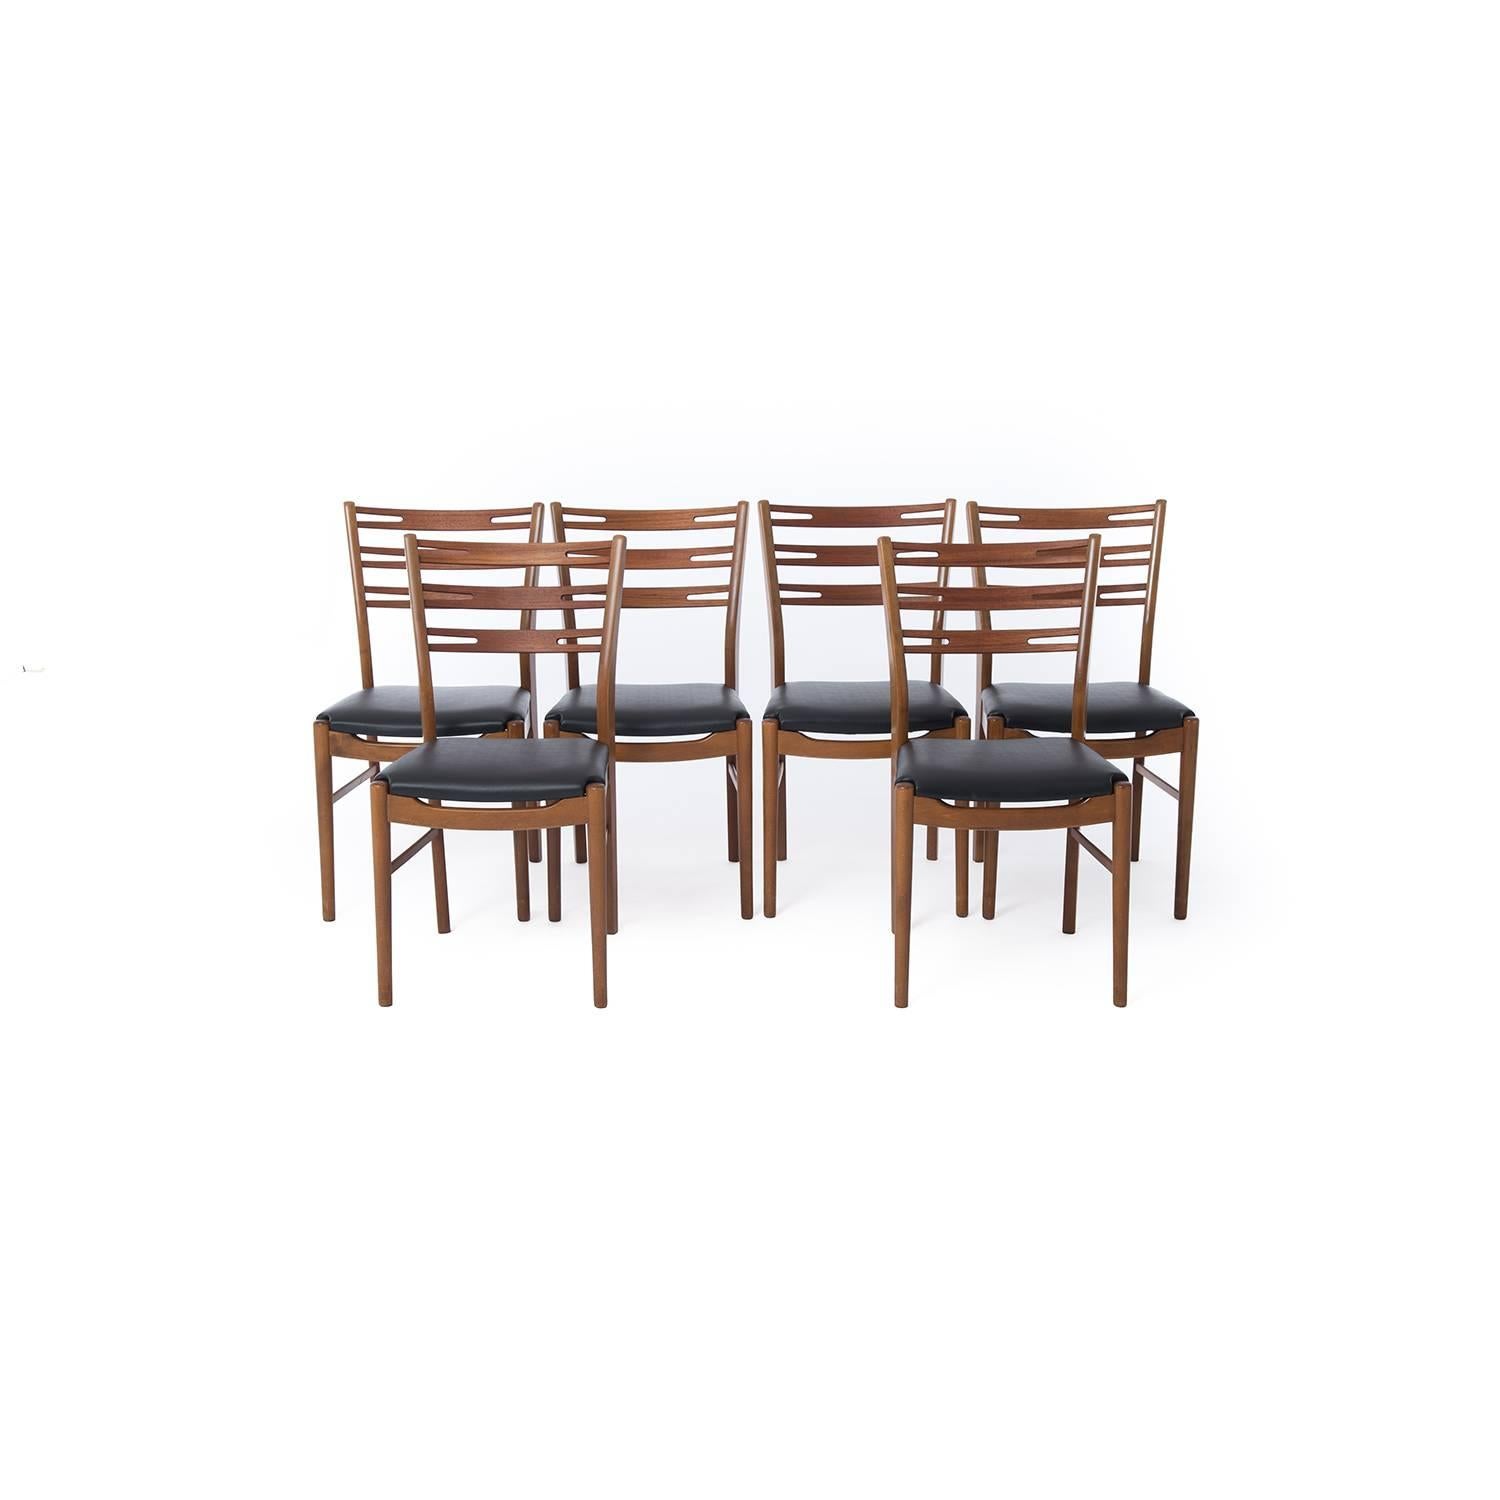 The teak rails to these dining chairs add warmth and contrast to a neutral beech frame.